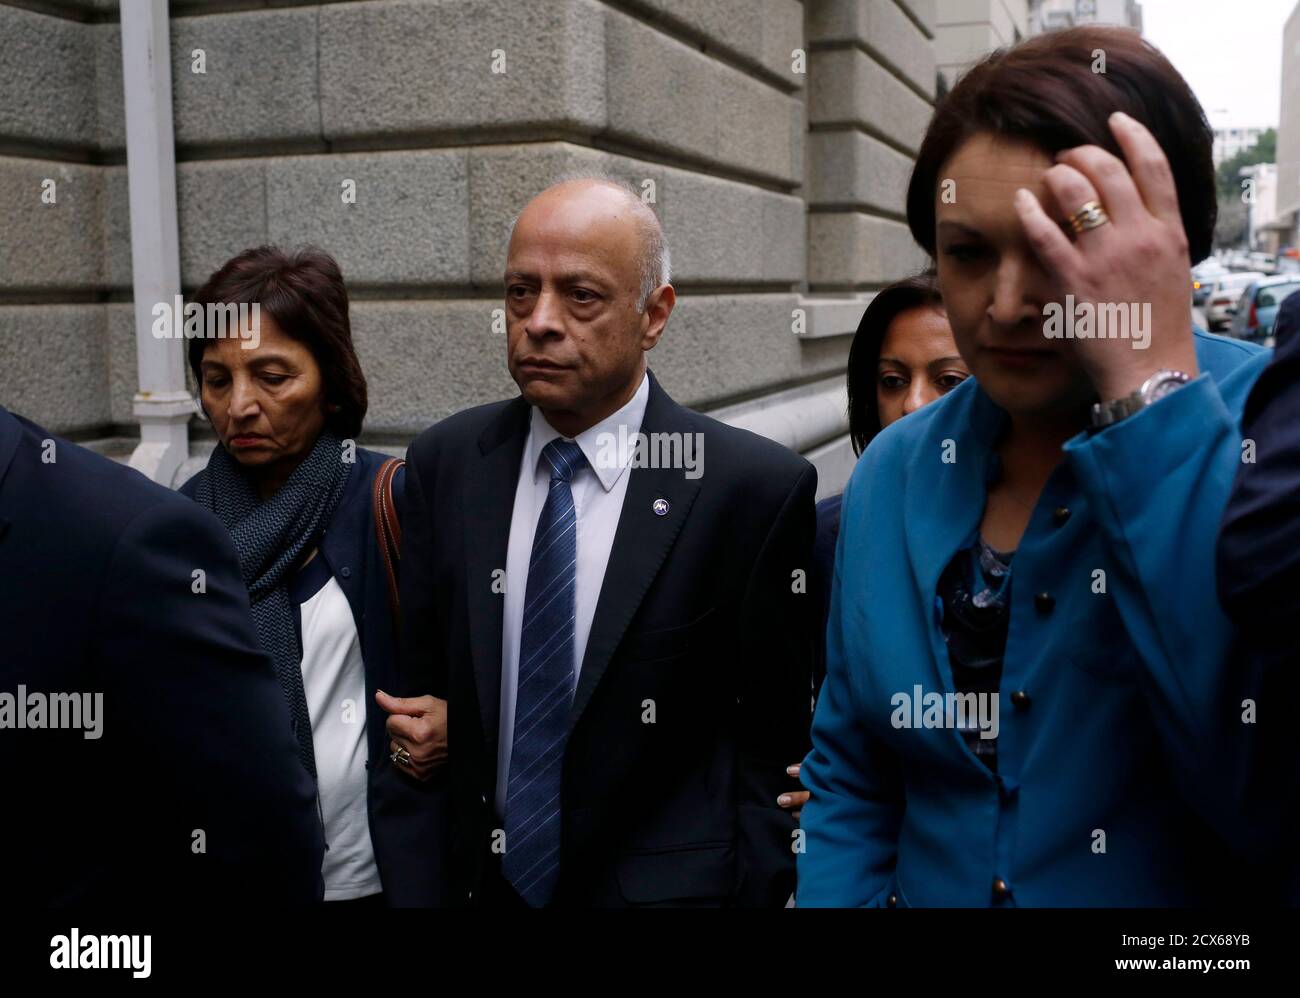 Prakesh Dewani (C), Shrien Dewani's father, arrives at the High Court in Cape Town with family members, June 20, 2014. A South African judge on Friday set Oct. 6 as the start date for the murder trial of British businessman Shrien Dewani who is accused of planning the killing of his bride in a staged car-jacking while on honeymoon in Cape Town in 2010. REUTERS/Mike Hutchings (SOUTH AFRICA - Tags: CRIME LAW) Stock Photo